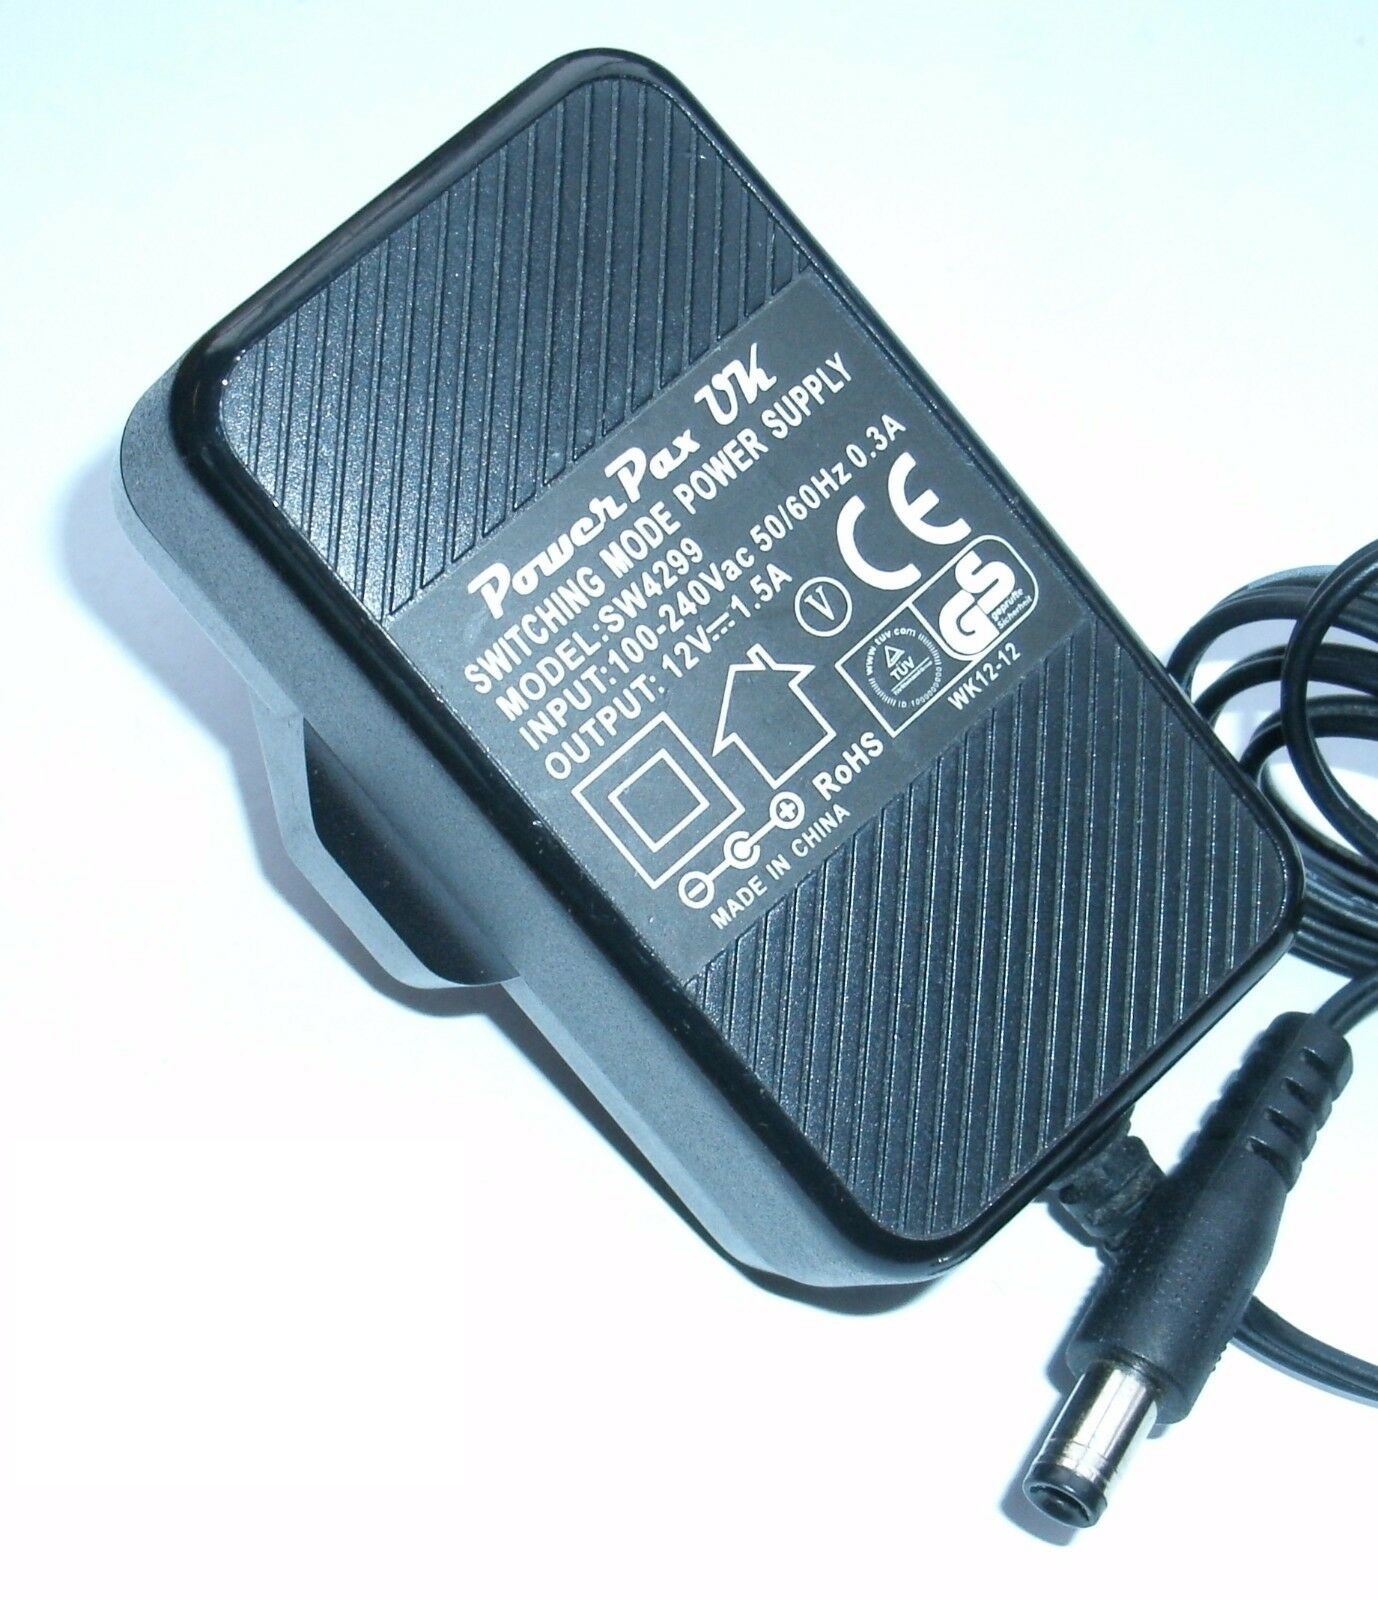 New POWER PAX AC ADAPTER SW4299 12V 1.5A UK PLUG Swiching mode power supply Specification: Brand: